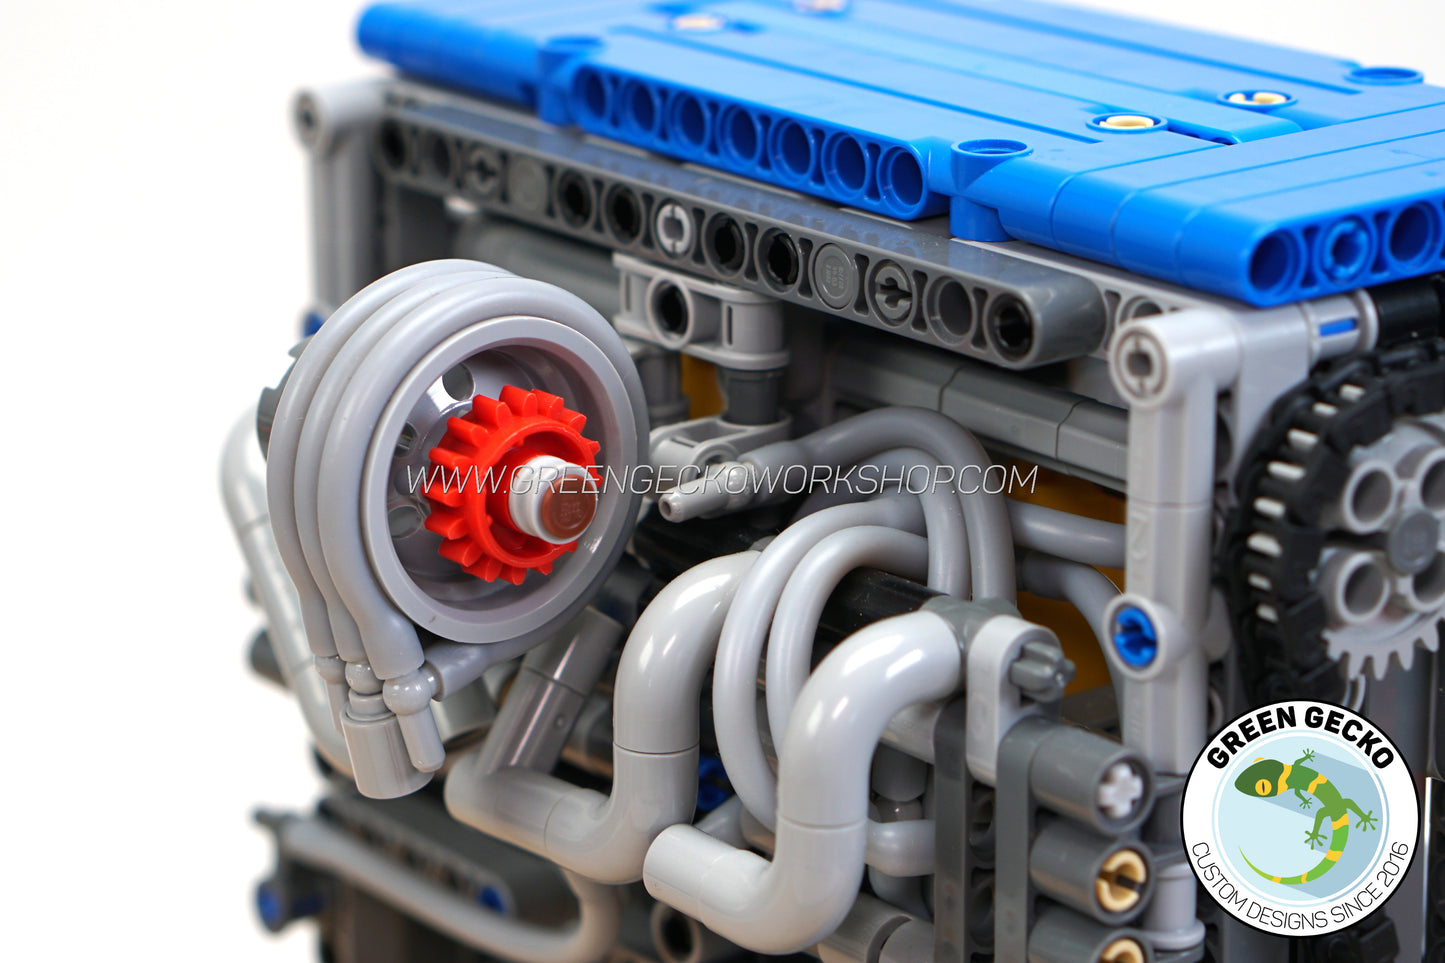 Complete Kit - Inline 4 Cylinder Turbo Lego Pneumatic Engine - Switchless 2000RPM + FREE 5 Speed Gearbox!